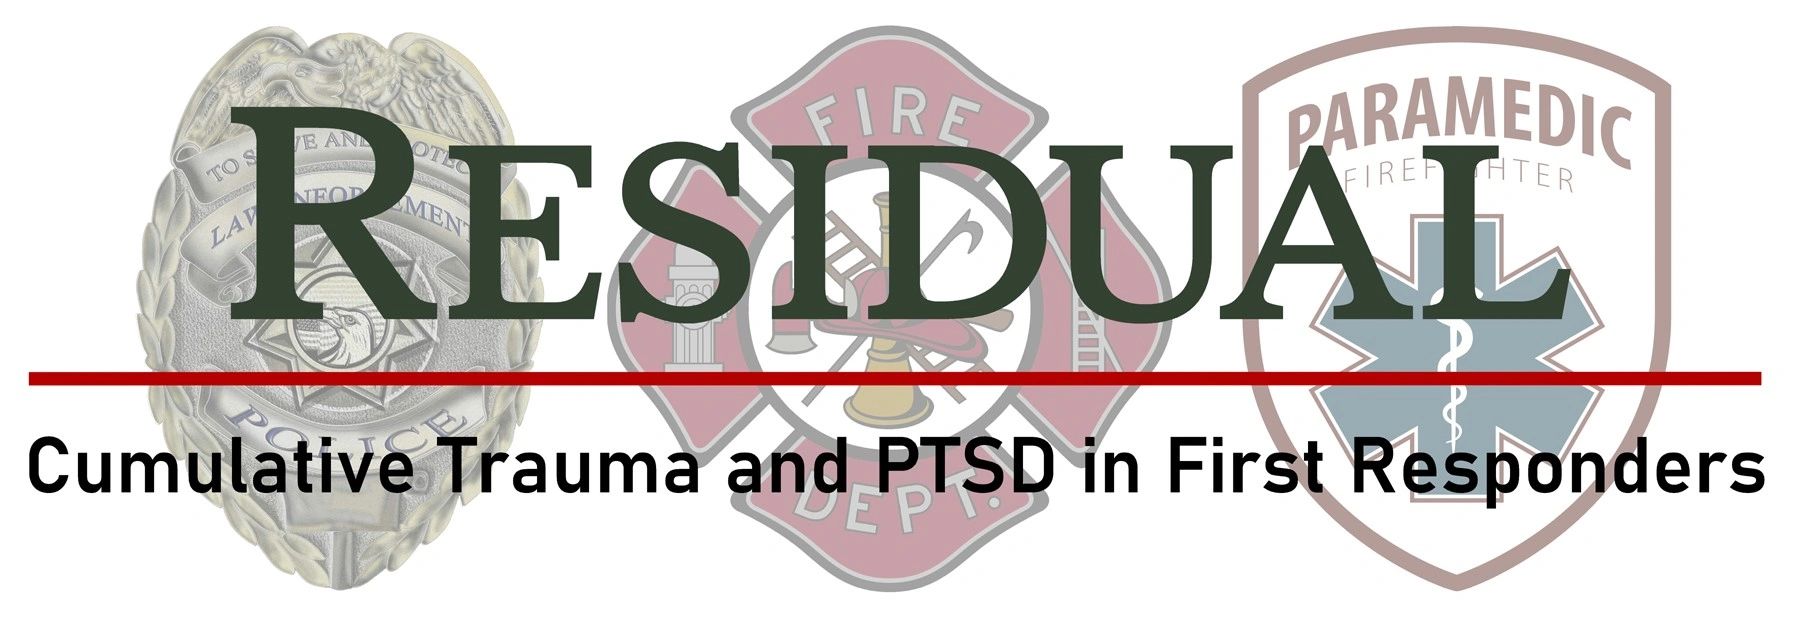 RESIDUAL: Cumulative Stress and PTSD in First Responders